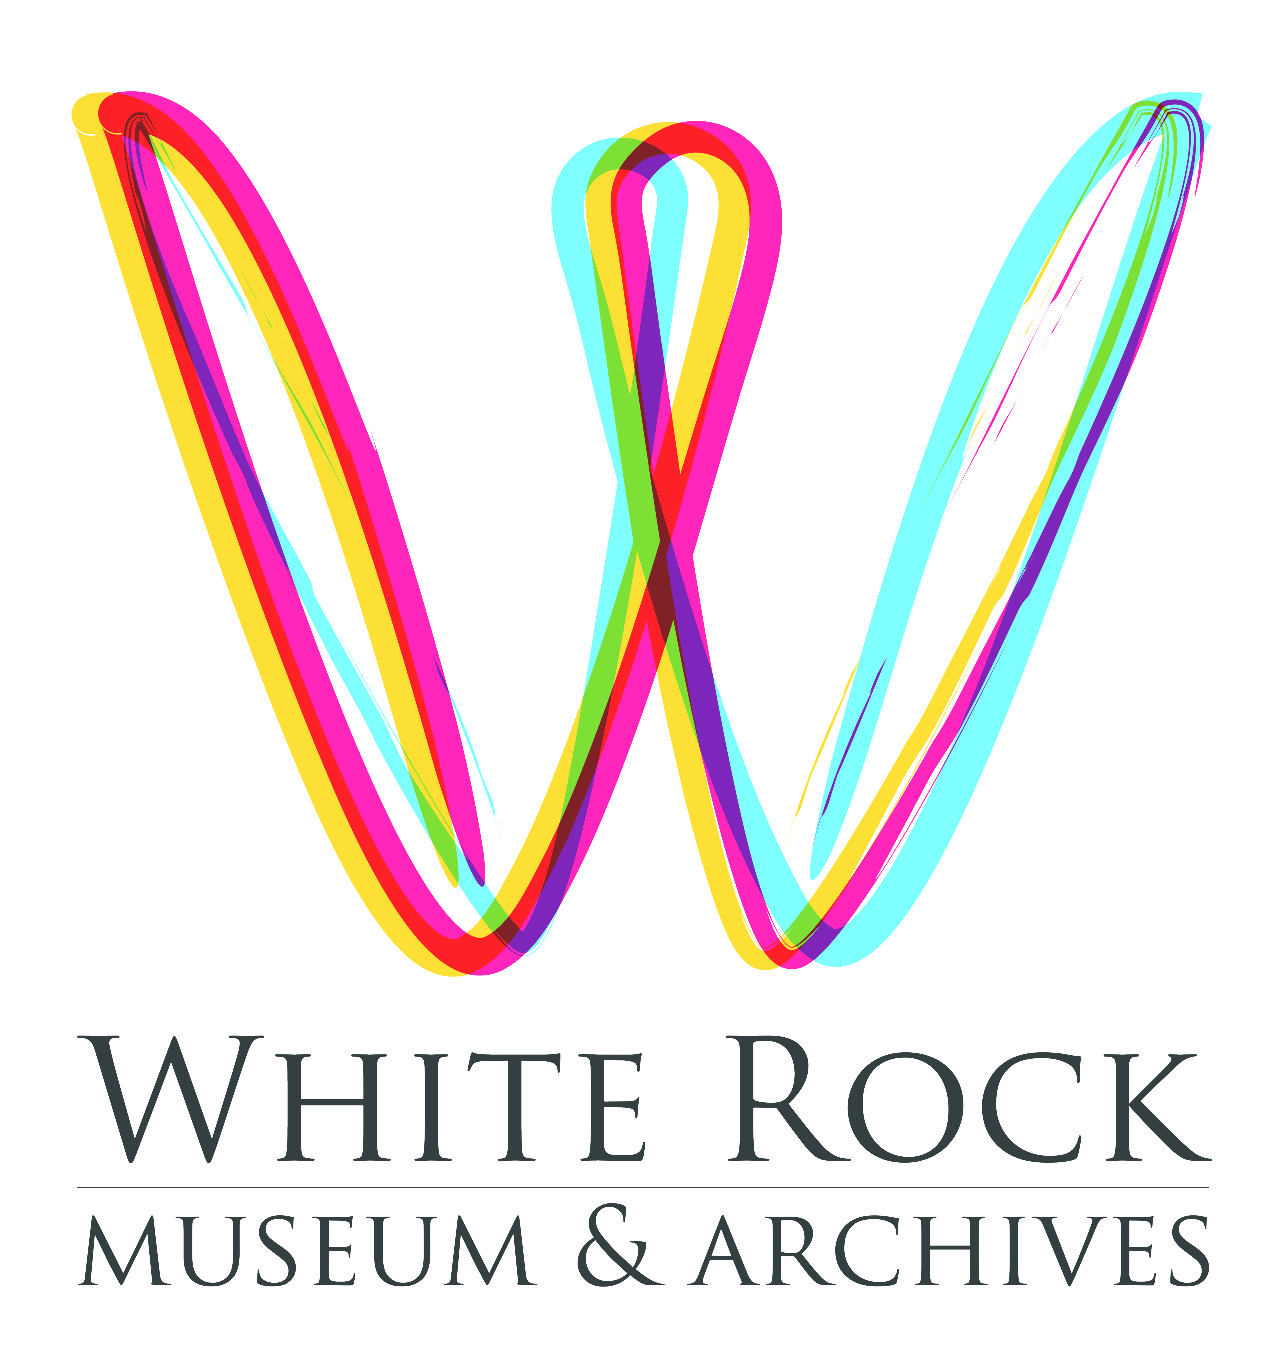 White Rock Museum & Archives logo